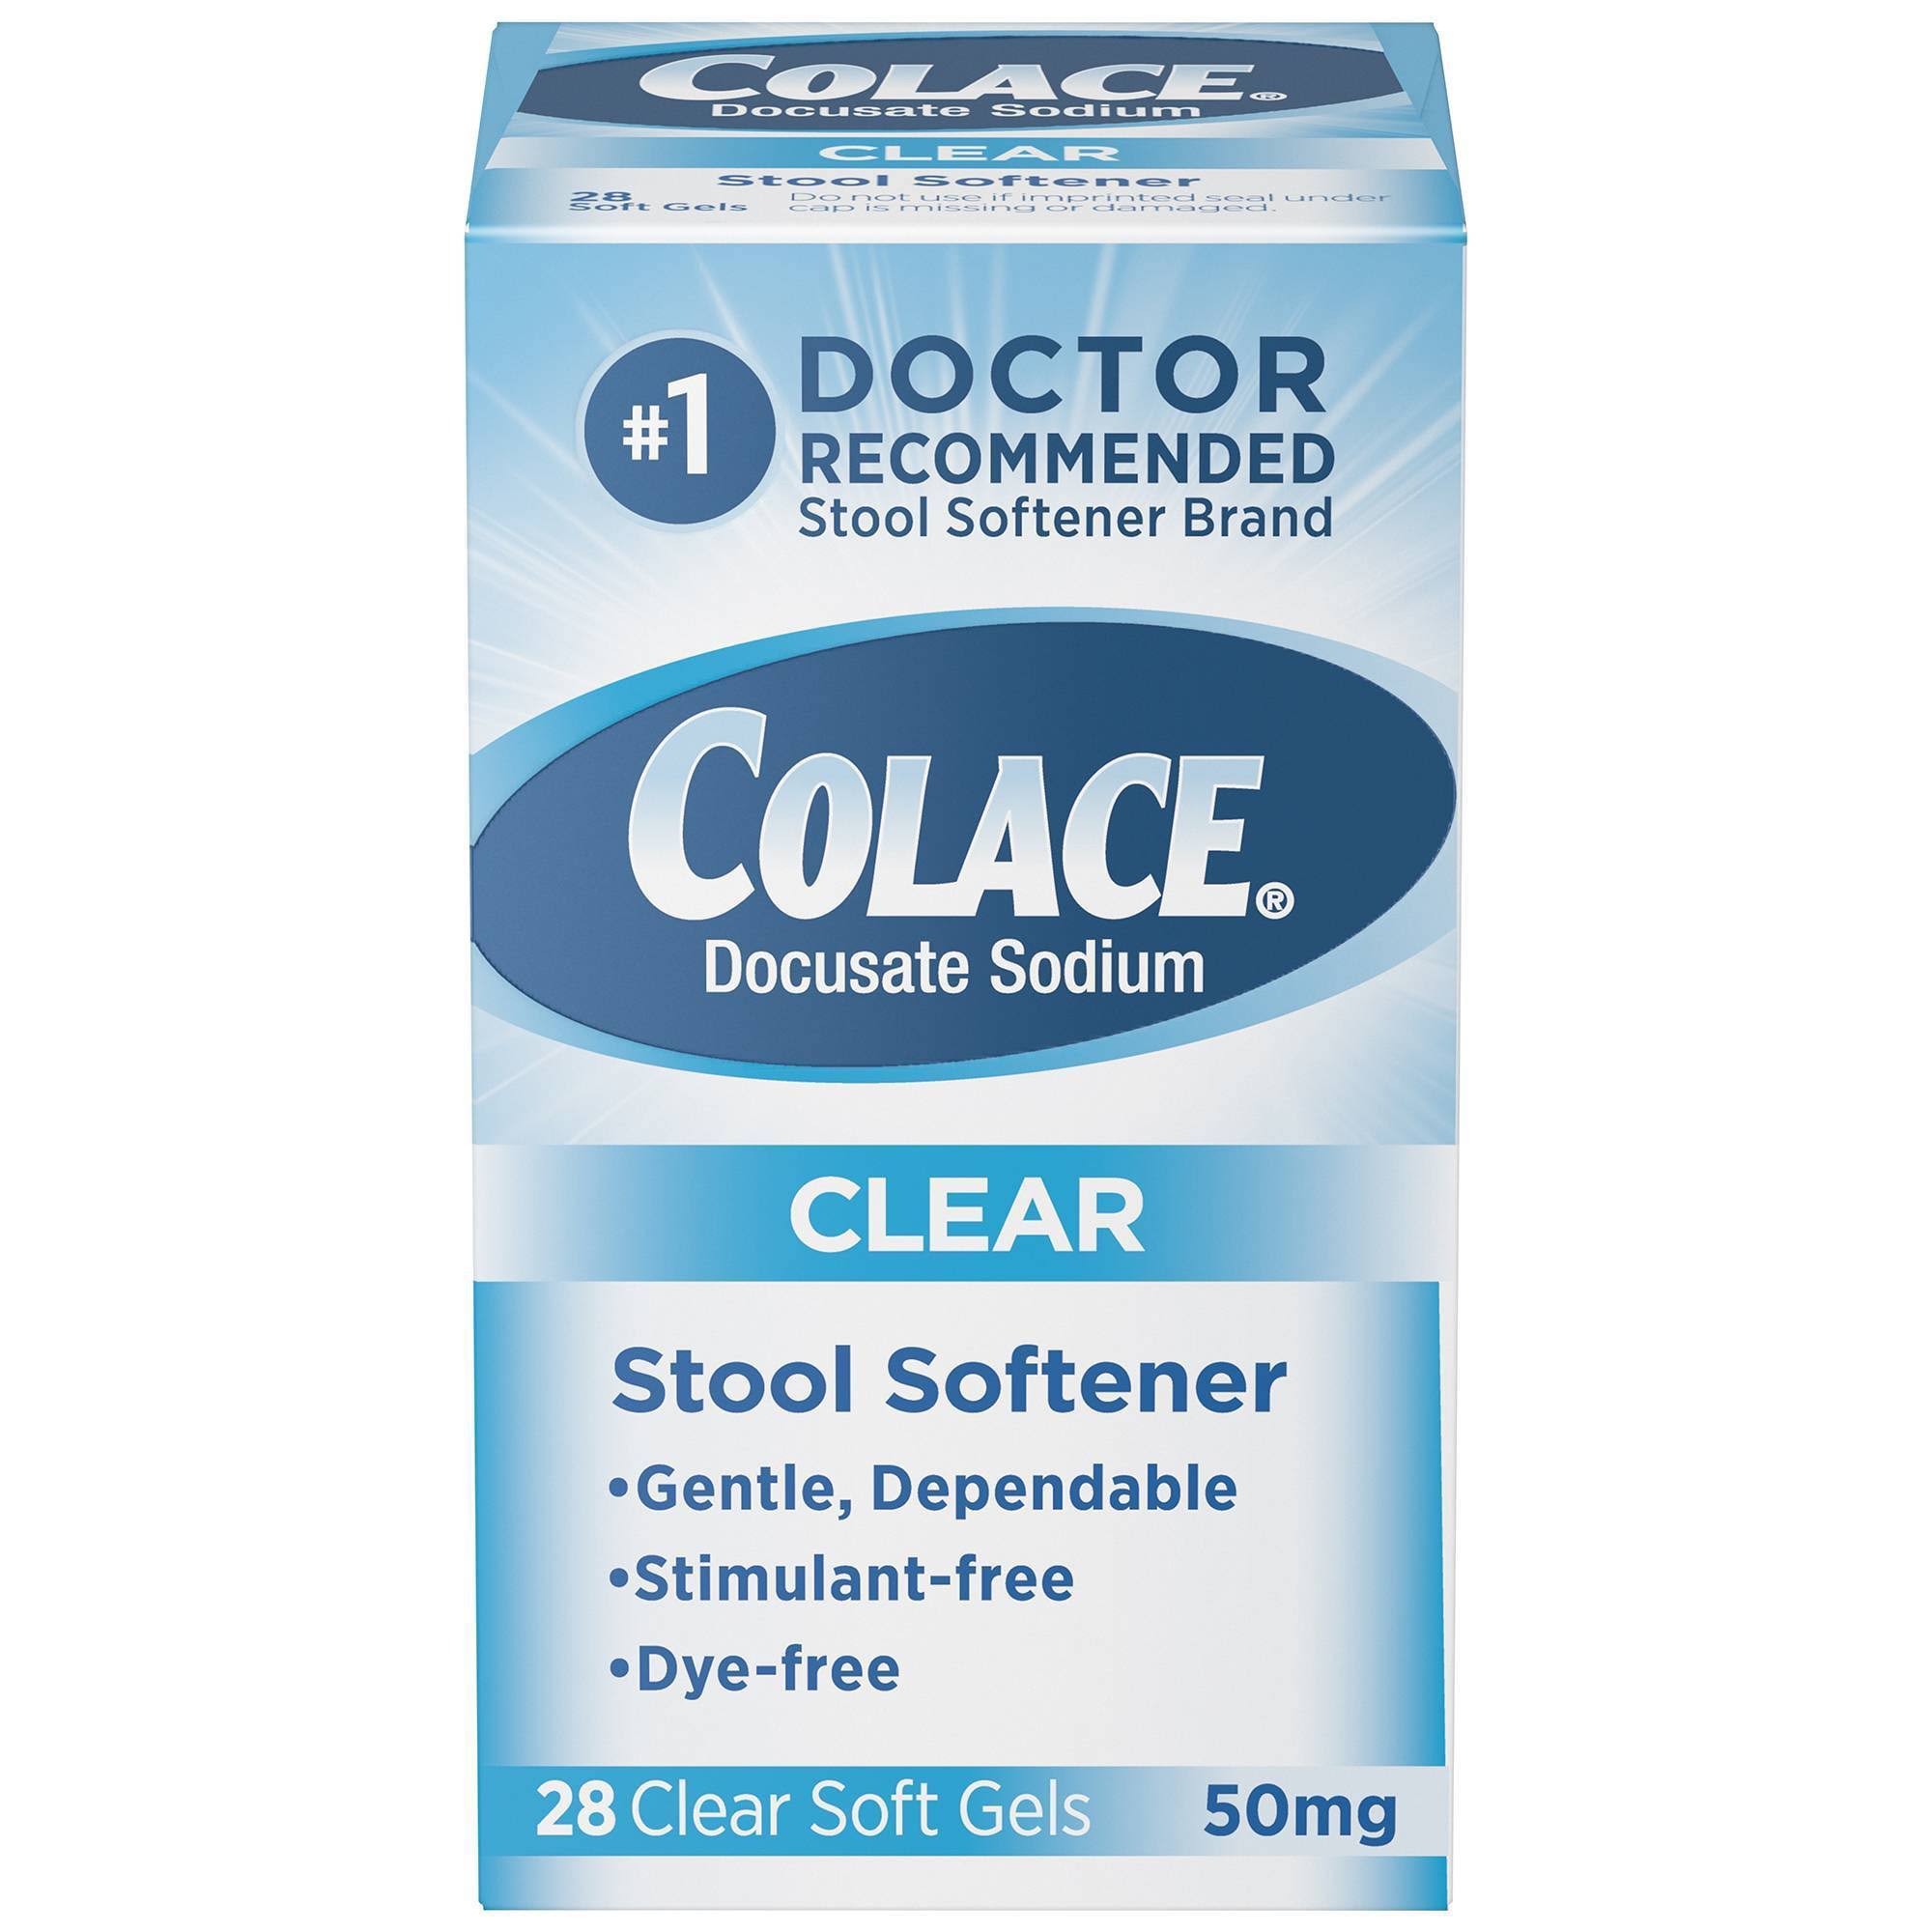 Colace Stool Softener, 50 mg, Clear Soft Gels - 28 soft gels